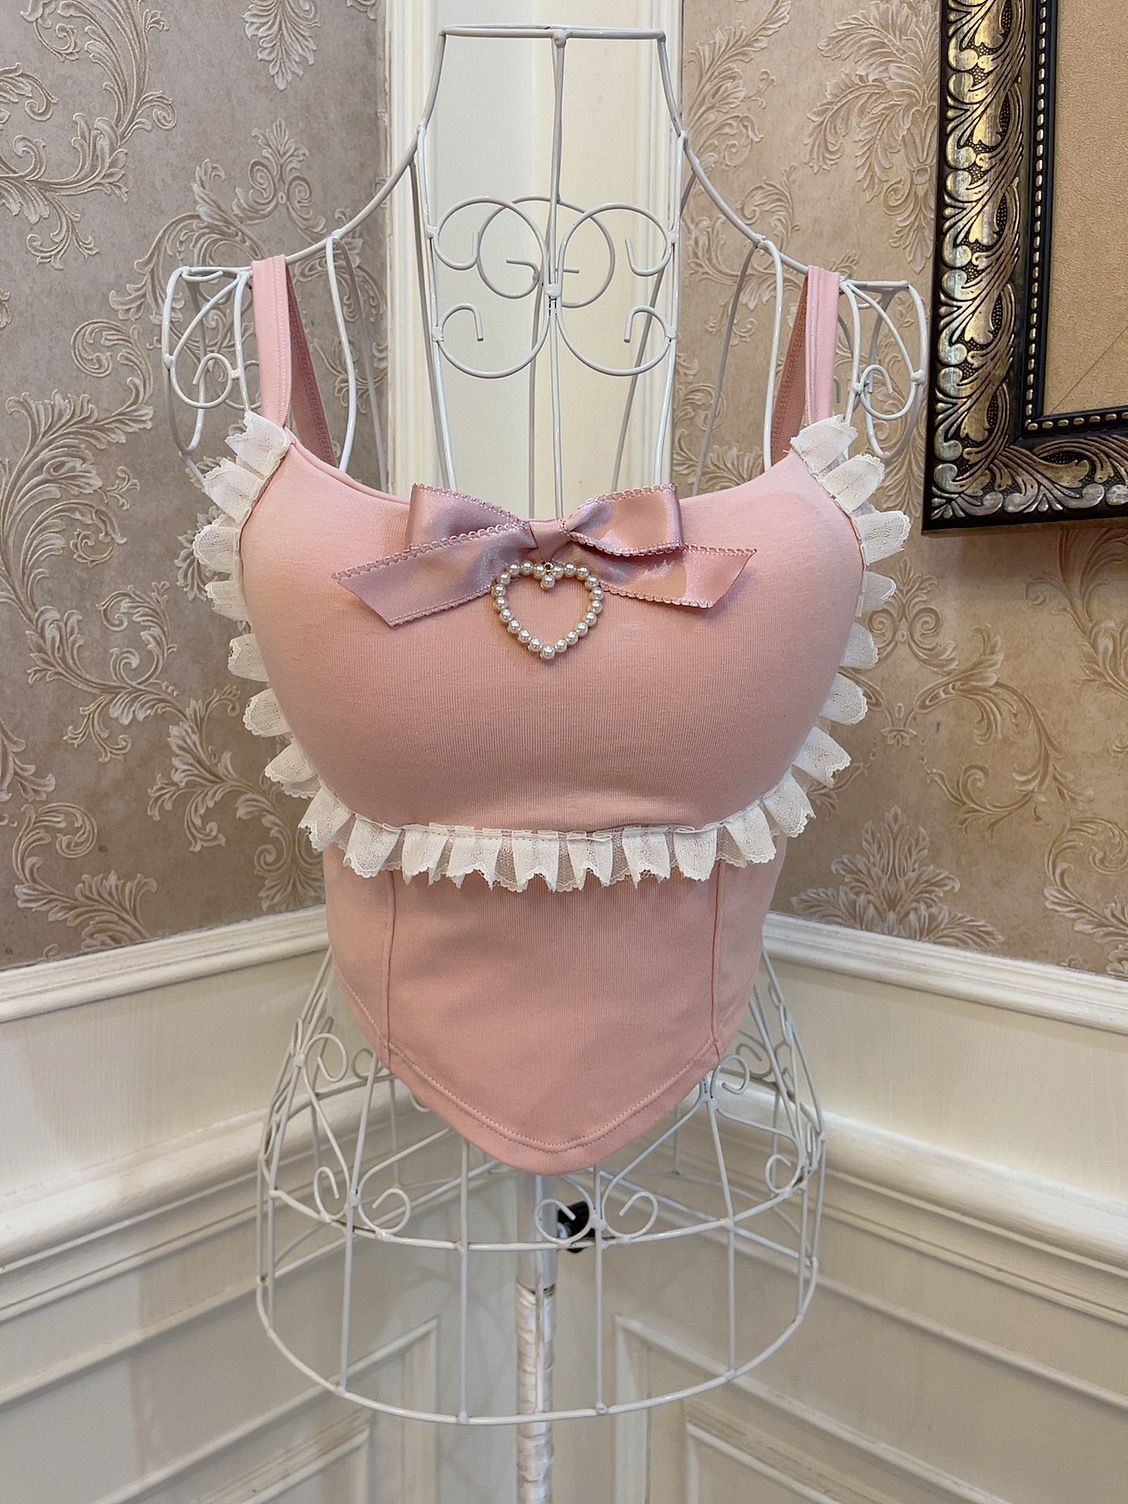 Sweetheart Princess Lace Frills Pink White Camisole Top